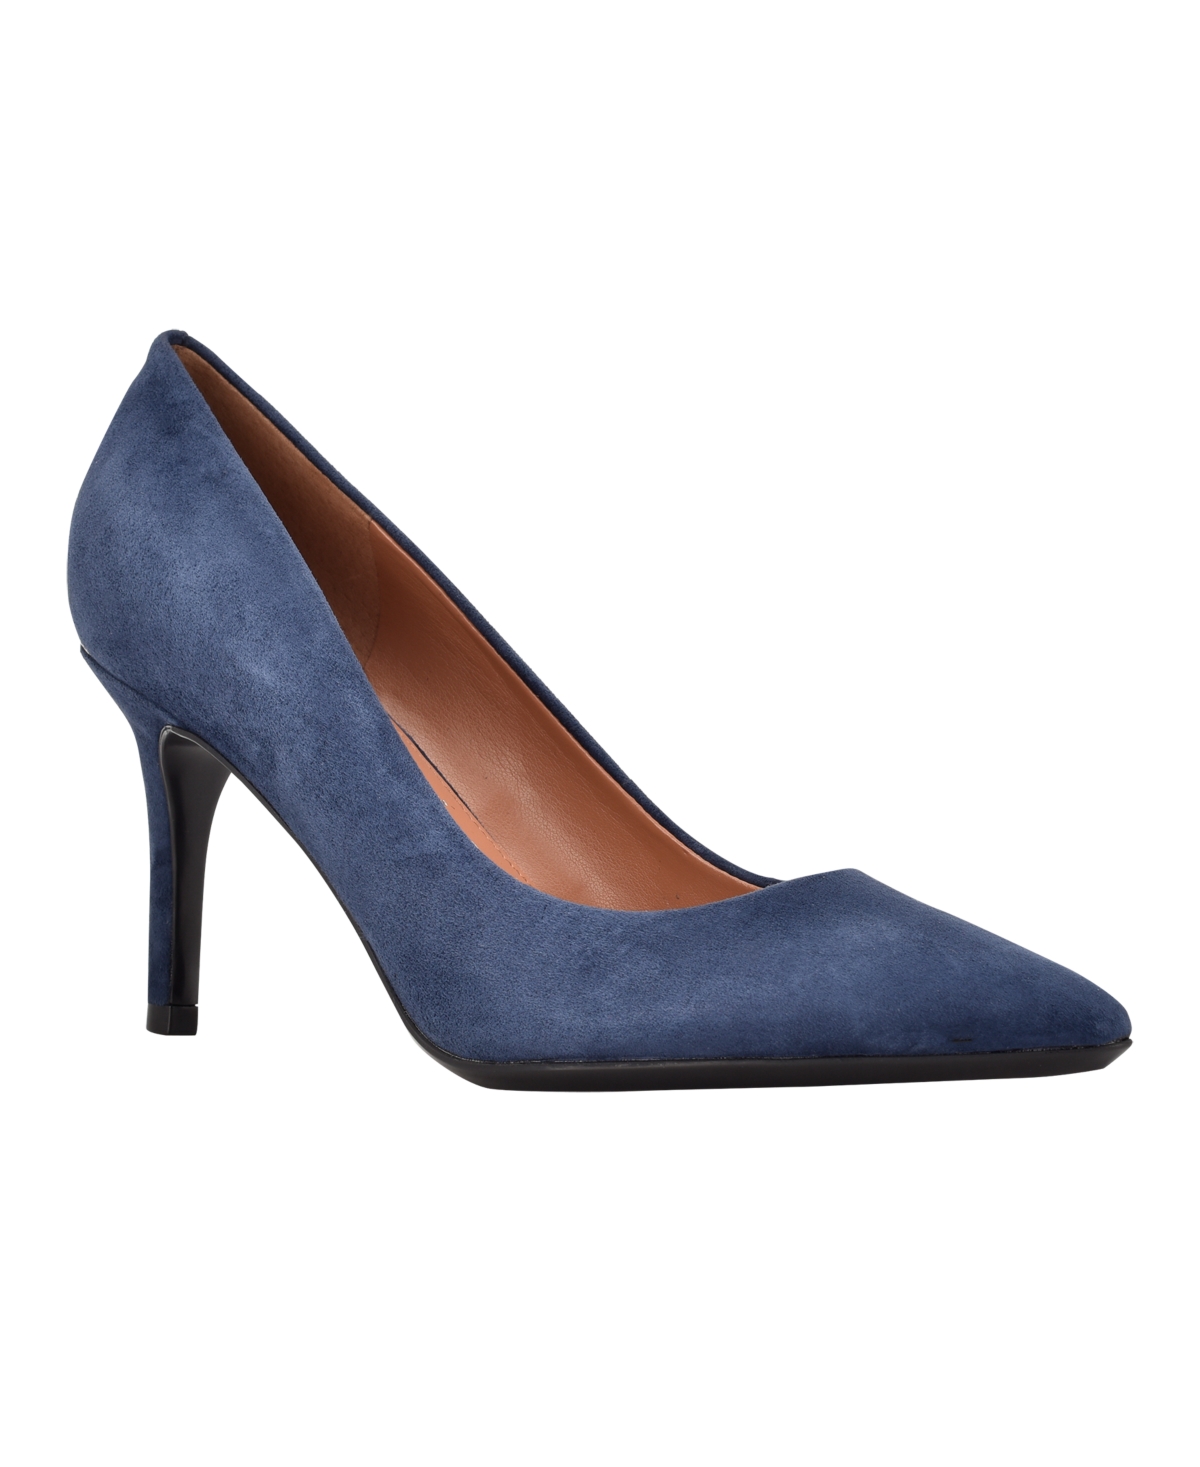 UPC 195972492899 product image for Calvin Klein Women's Gayle Pointy Toe Pumps Women's Shoes | upcitemdb.com